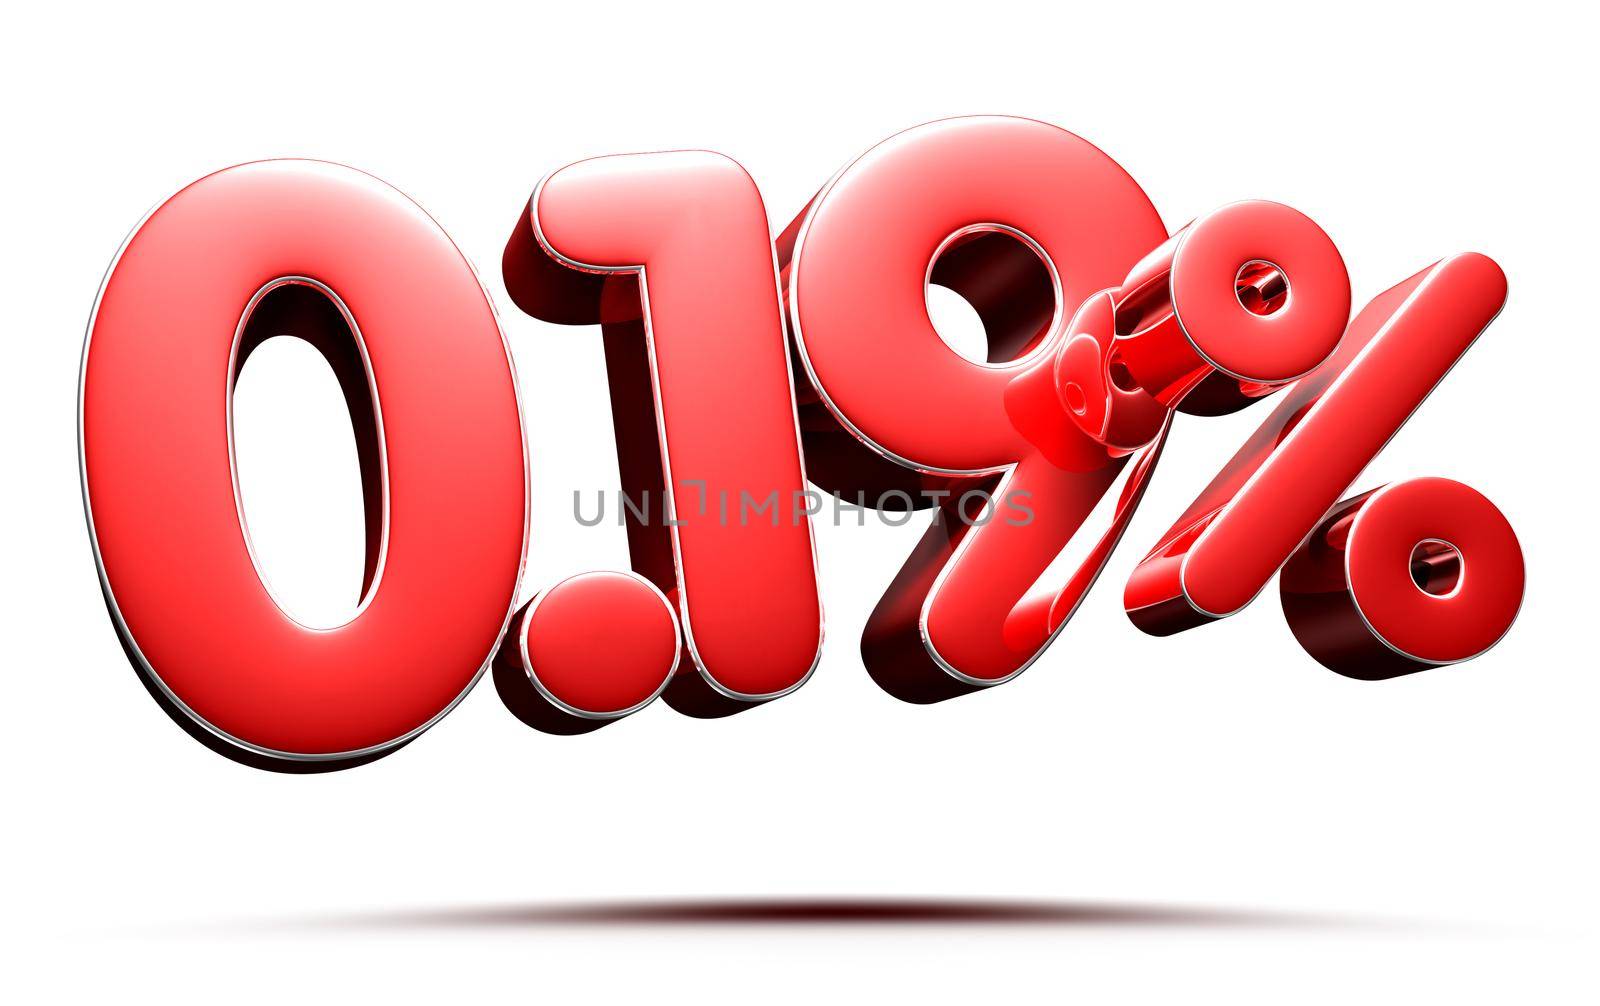 0.19 percent red on white background illustration 3D rendering with clipping path.